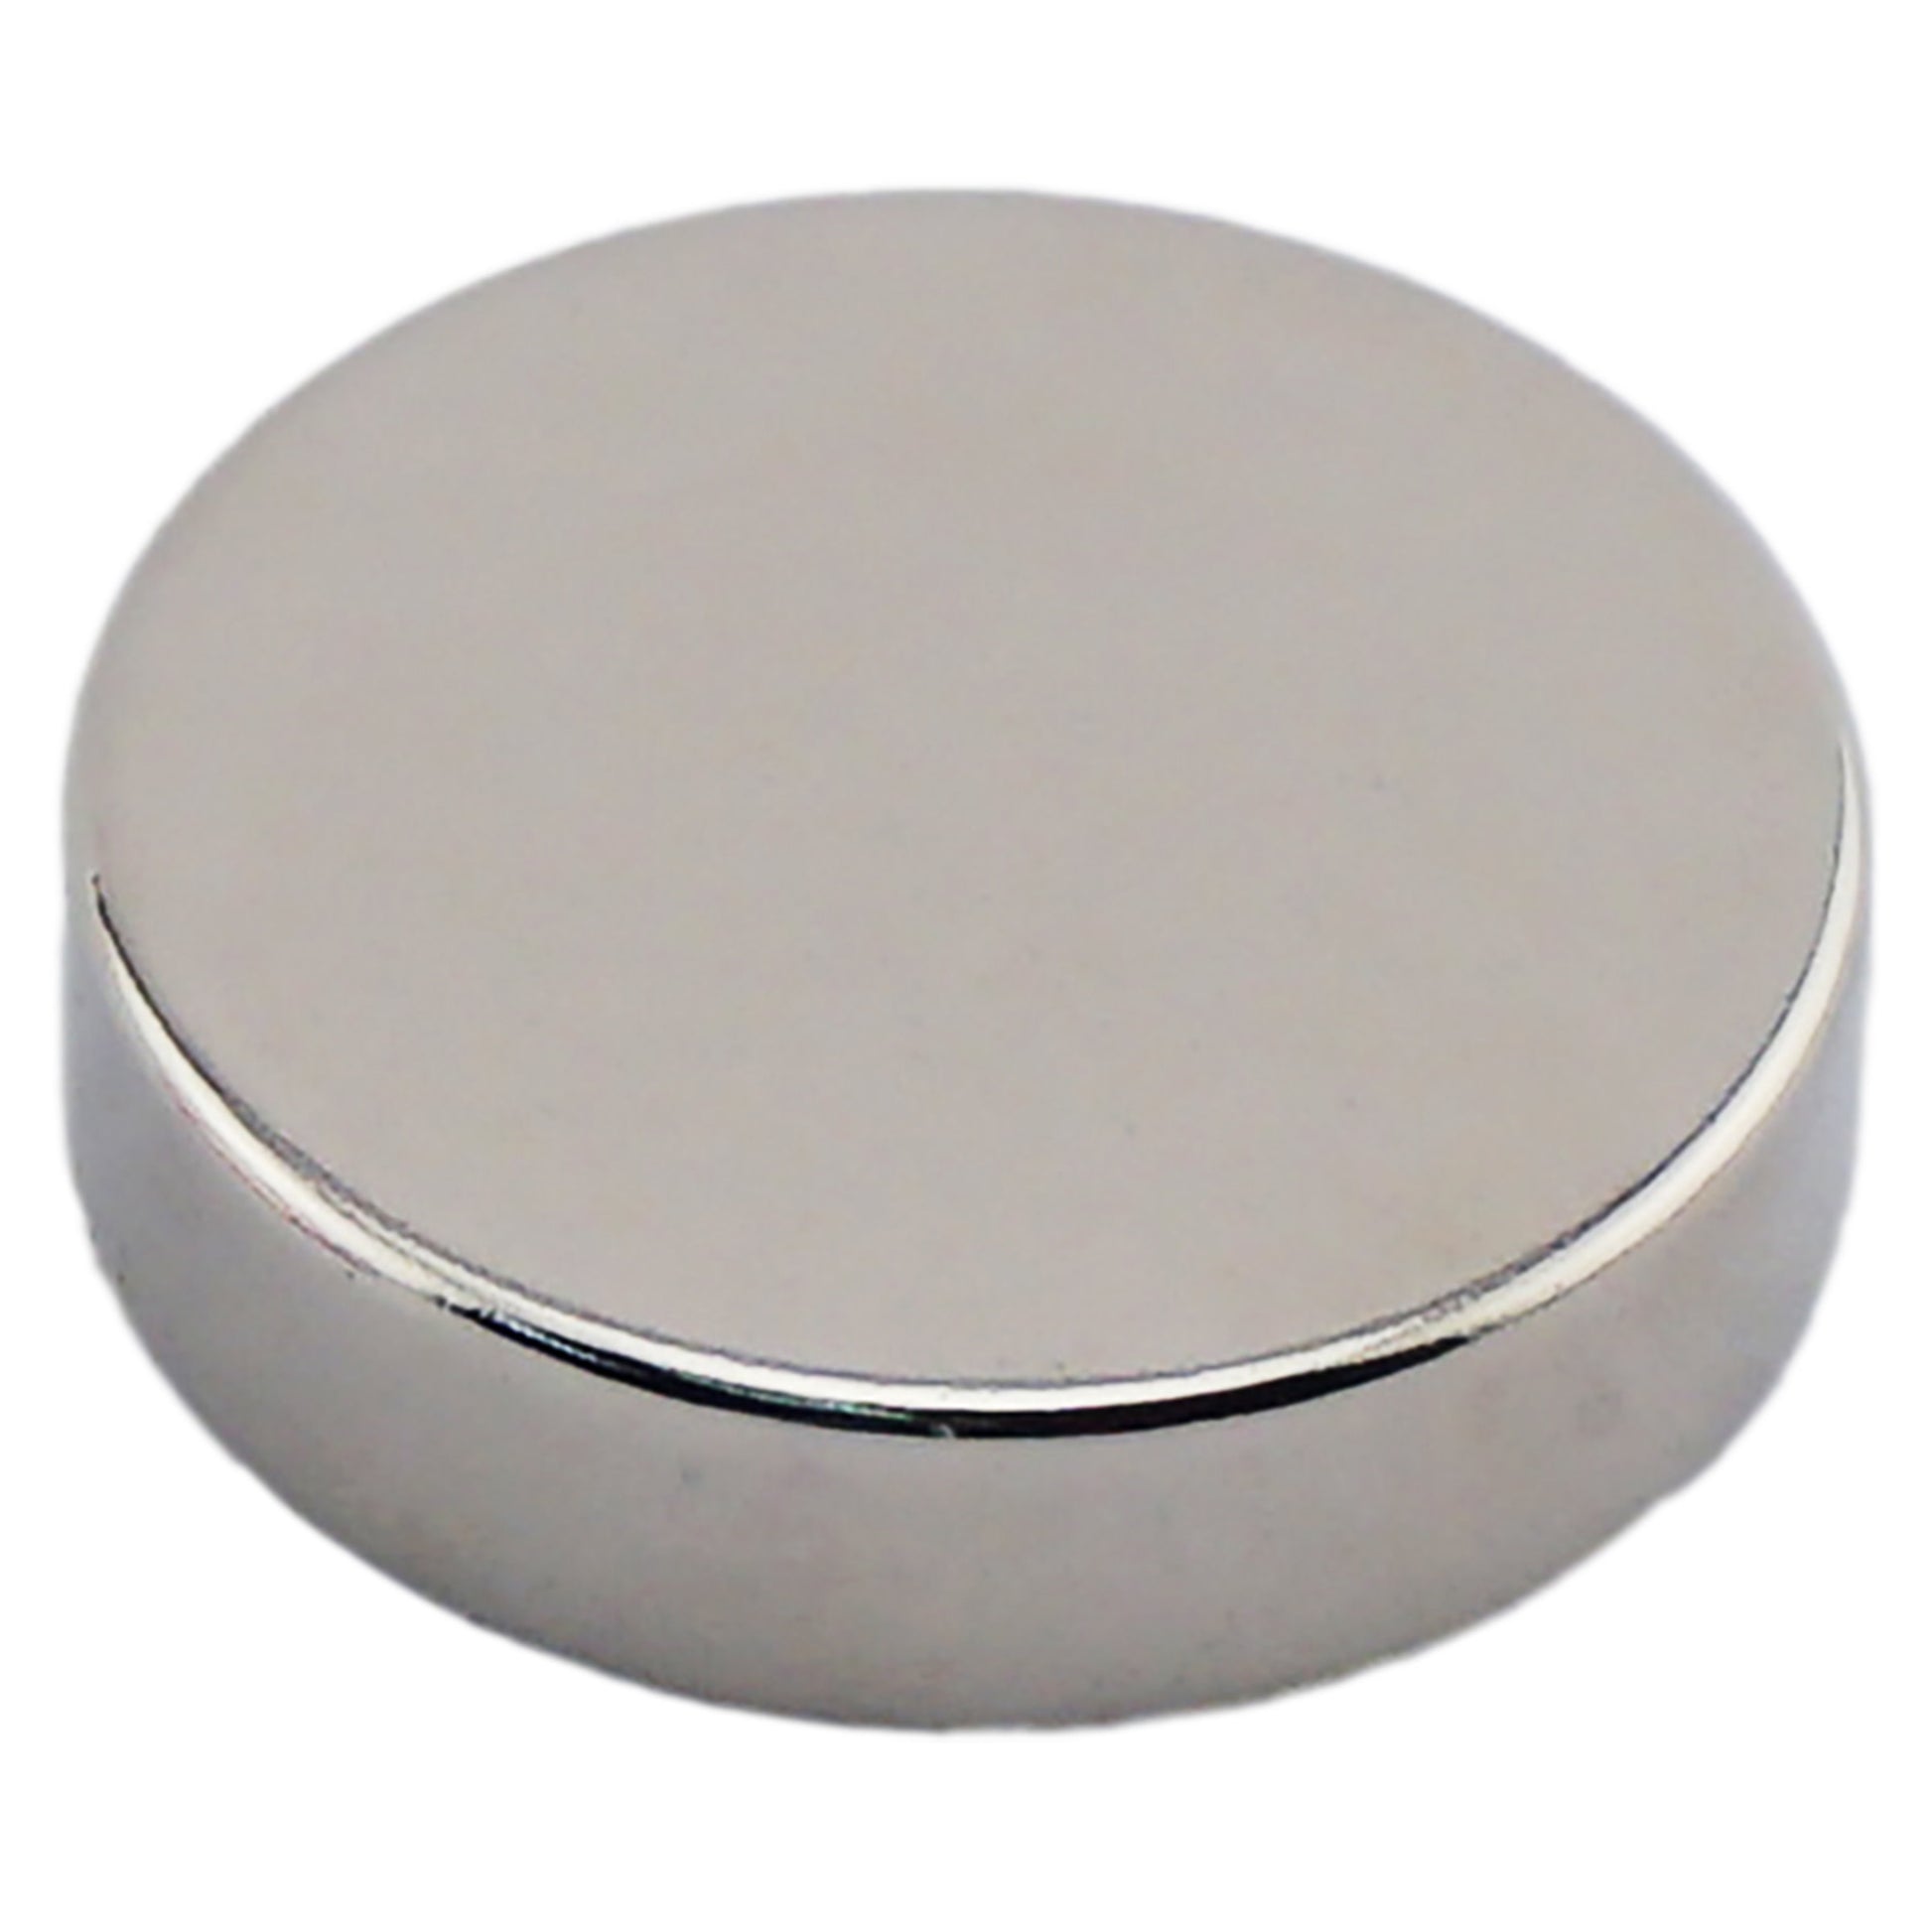 Load image into Gallery viewer, ND009300N Neodymium Disc Magnet - Front View